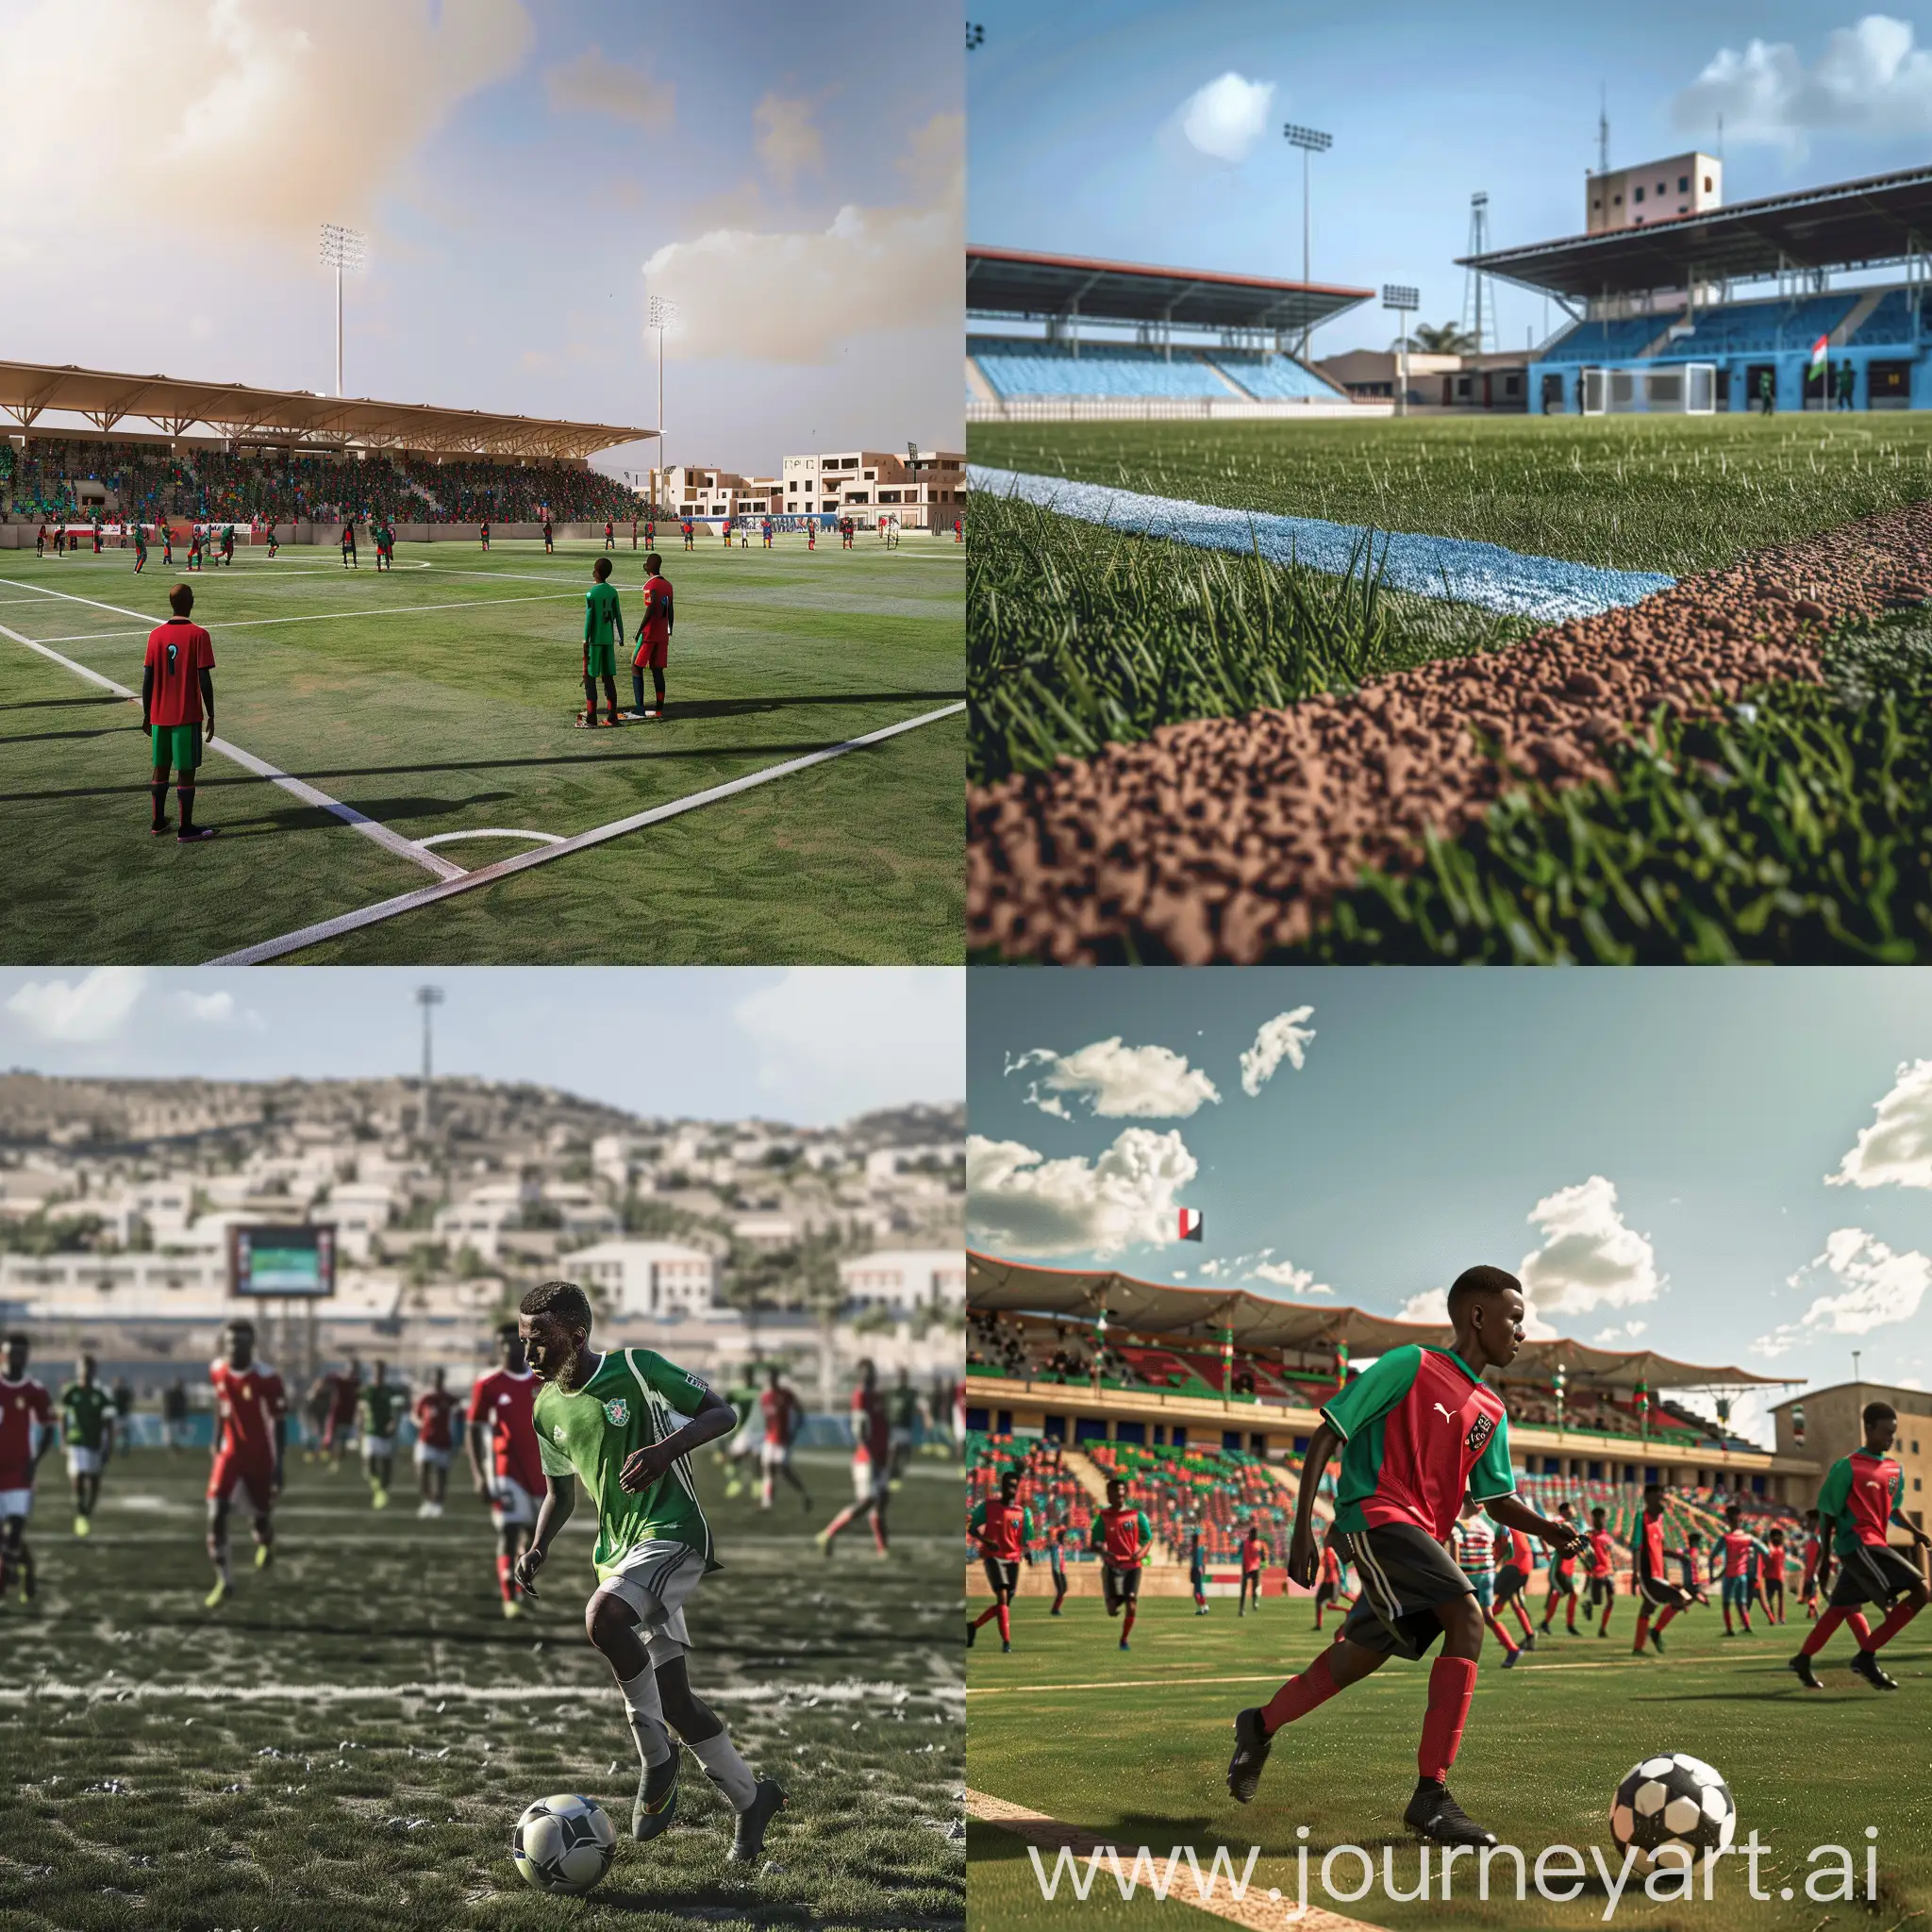 Give me the realistic photo that midjourney ever created of  coolest somali football team in hargeisa. Make sure the stadium is hargeisa stadium.